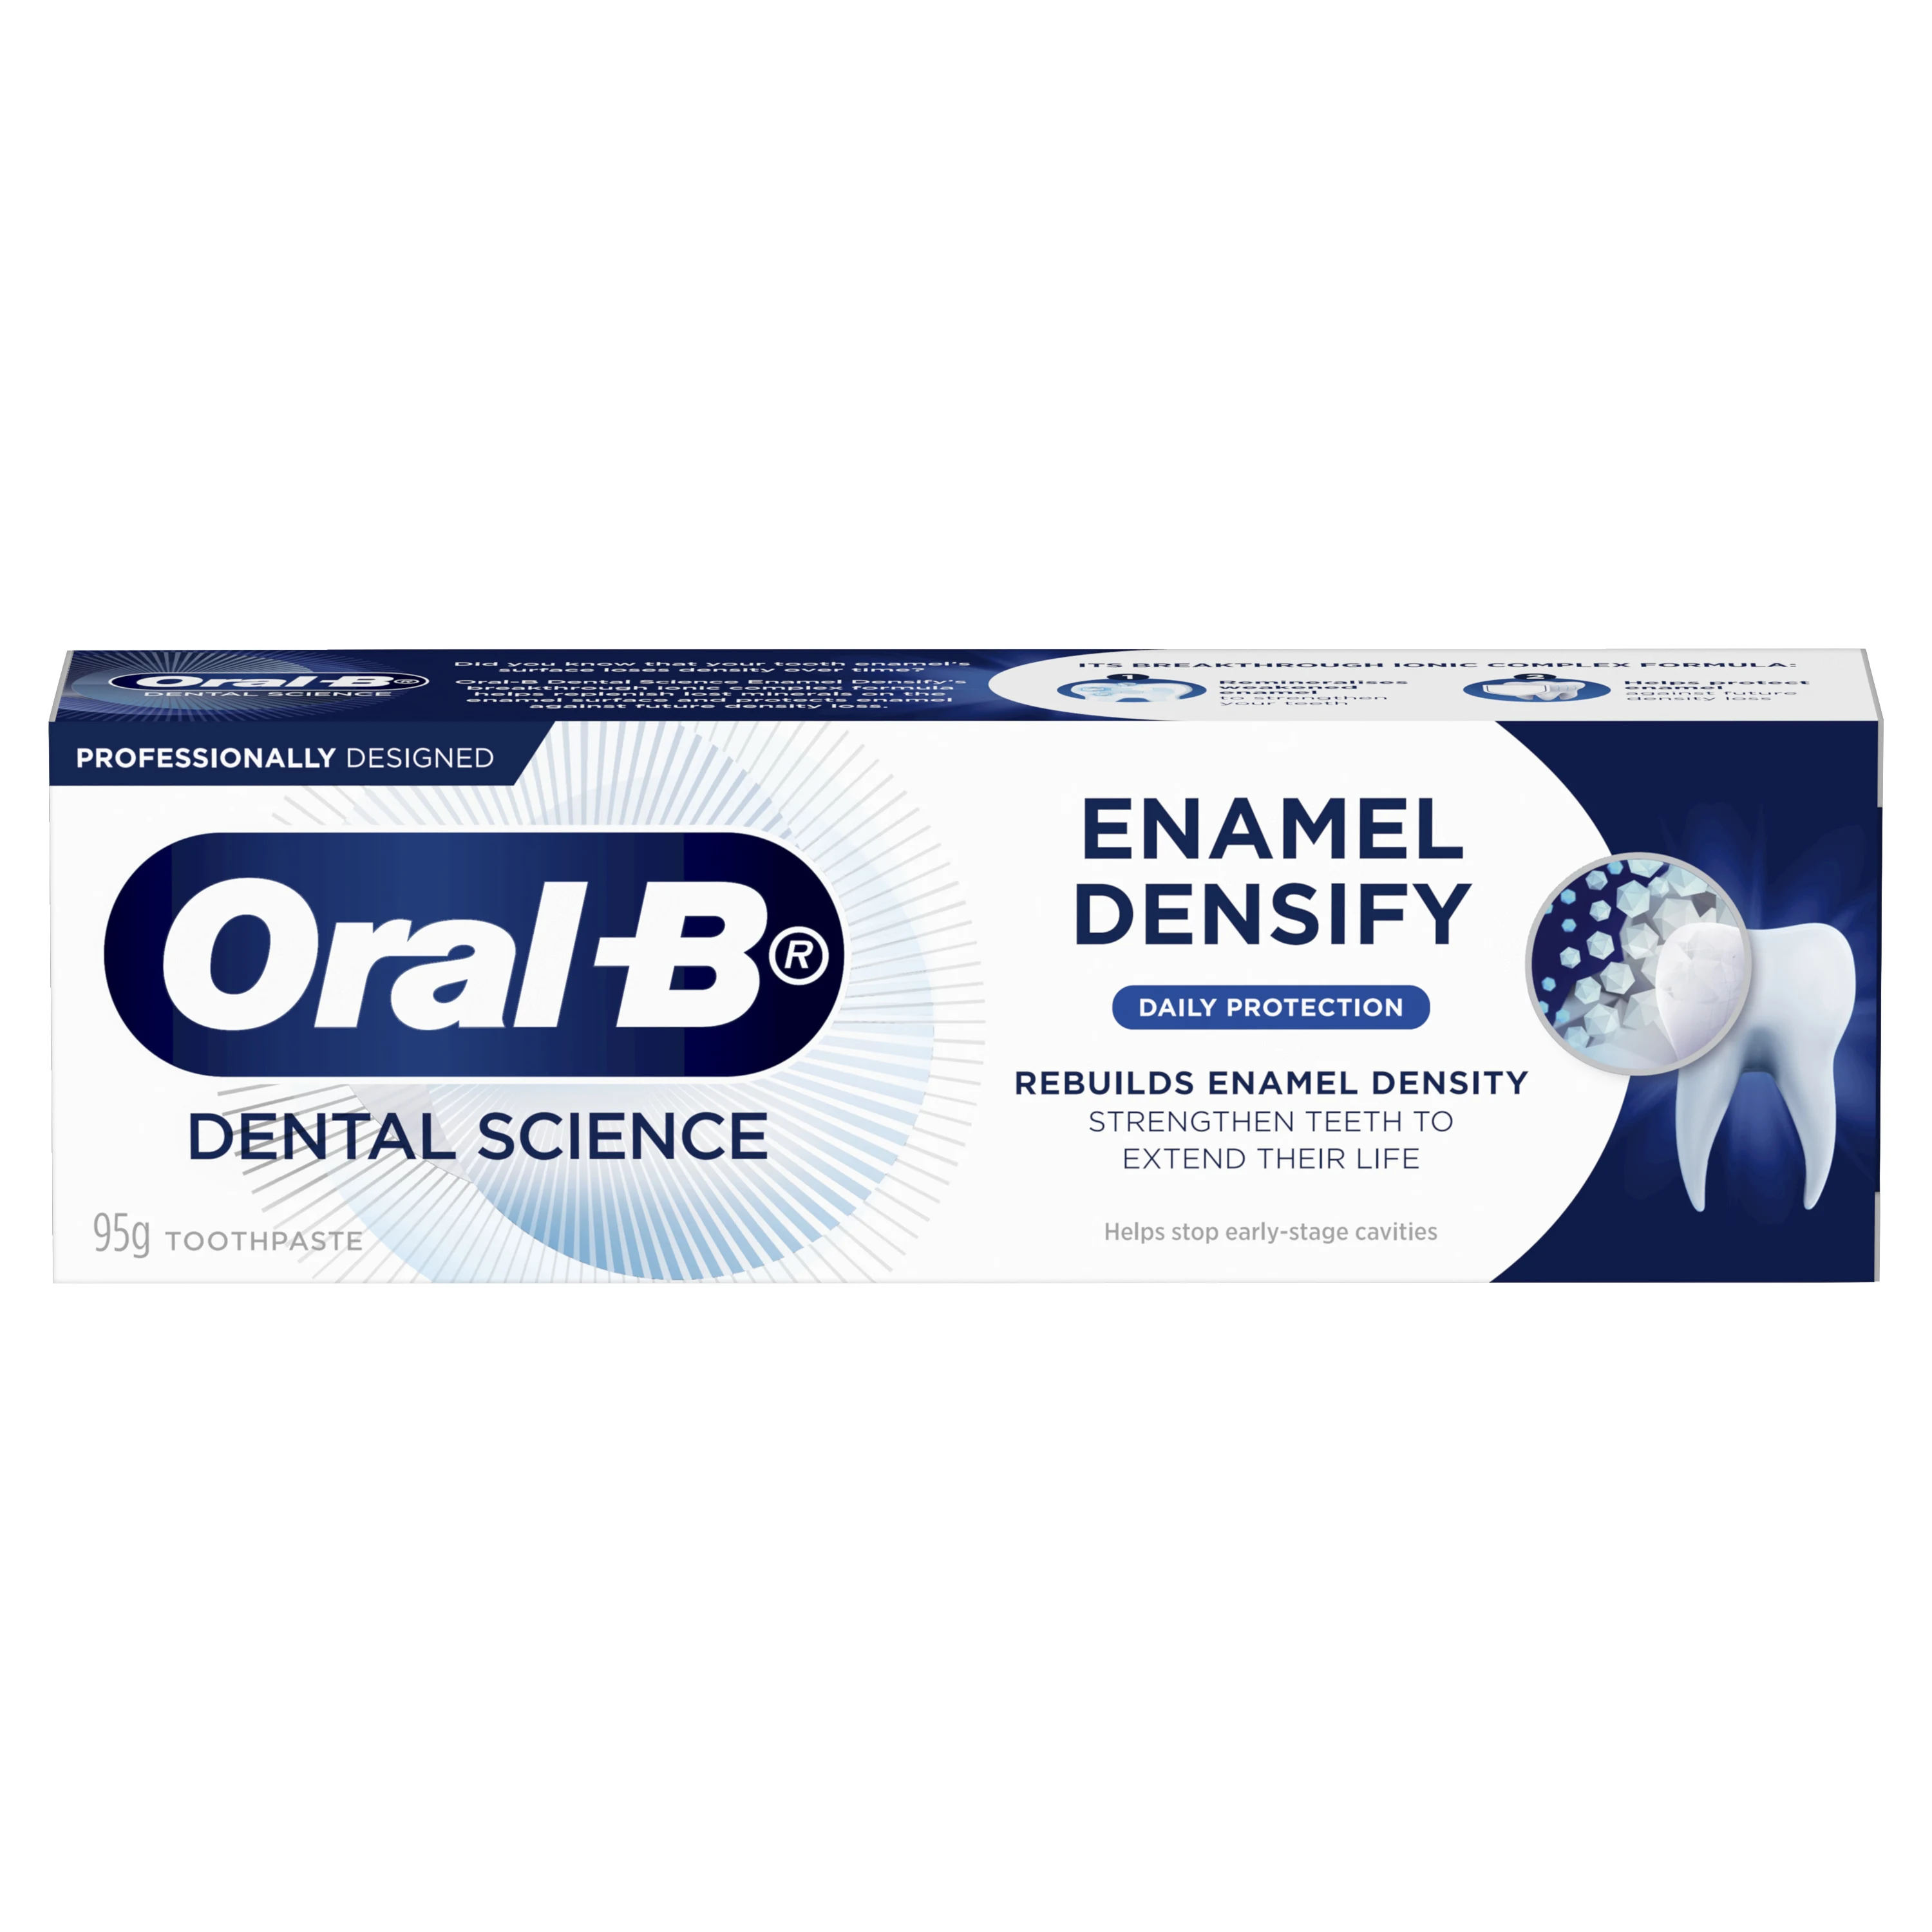 Oral-B Densify Daily Protection Toothpaste 